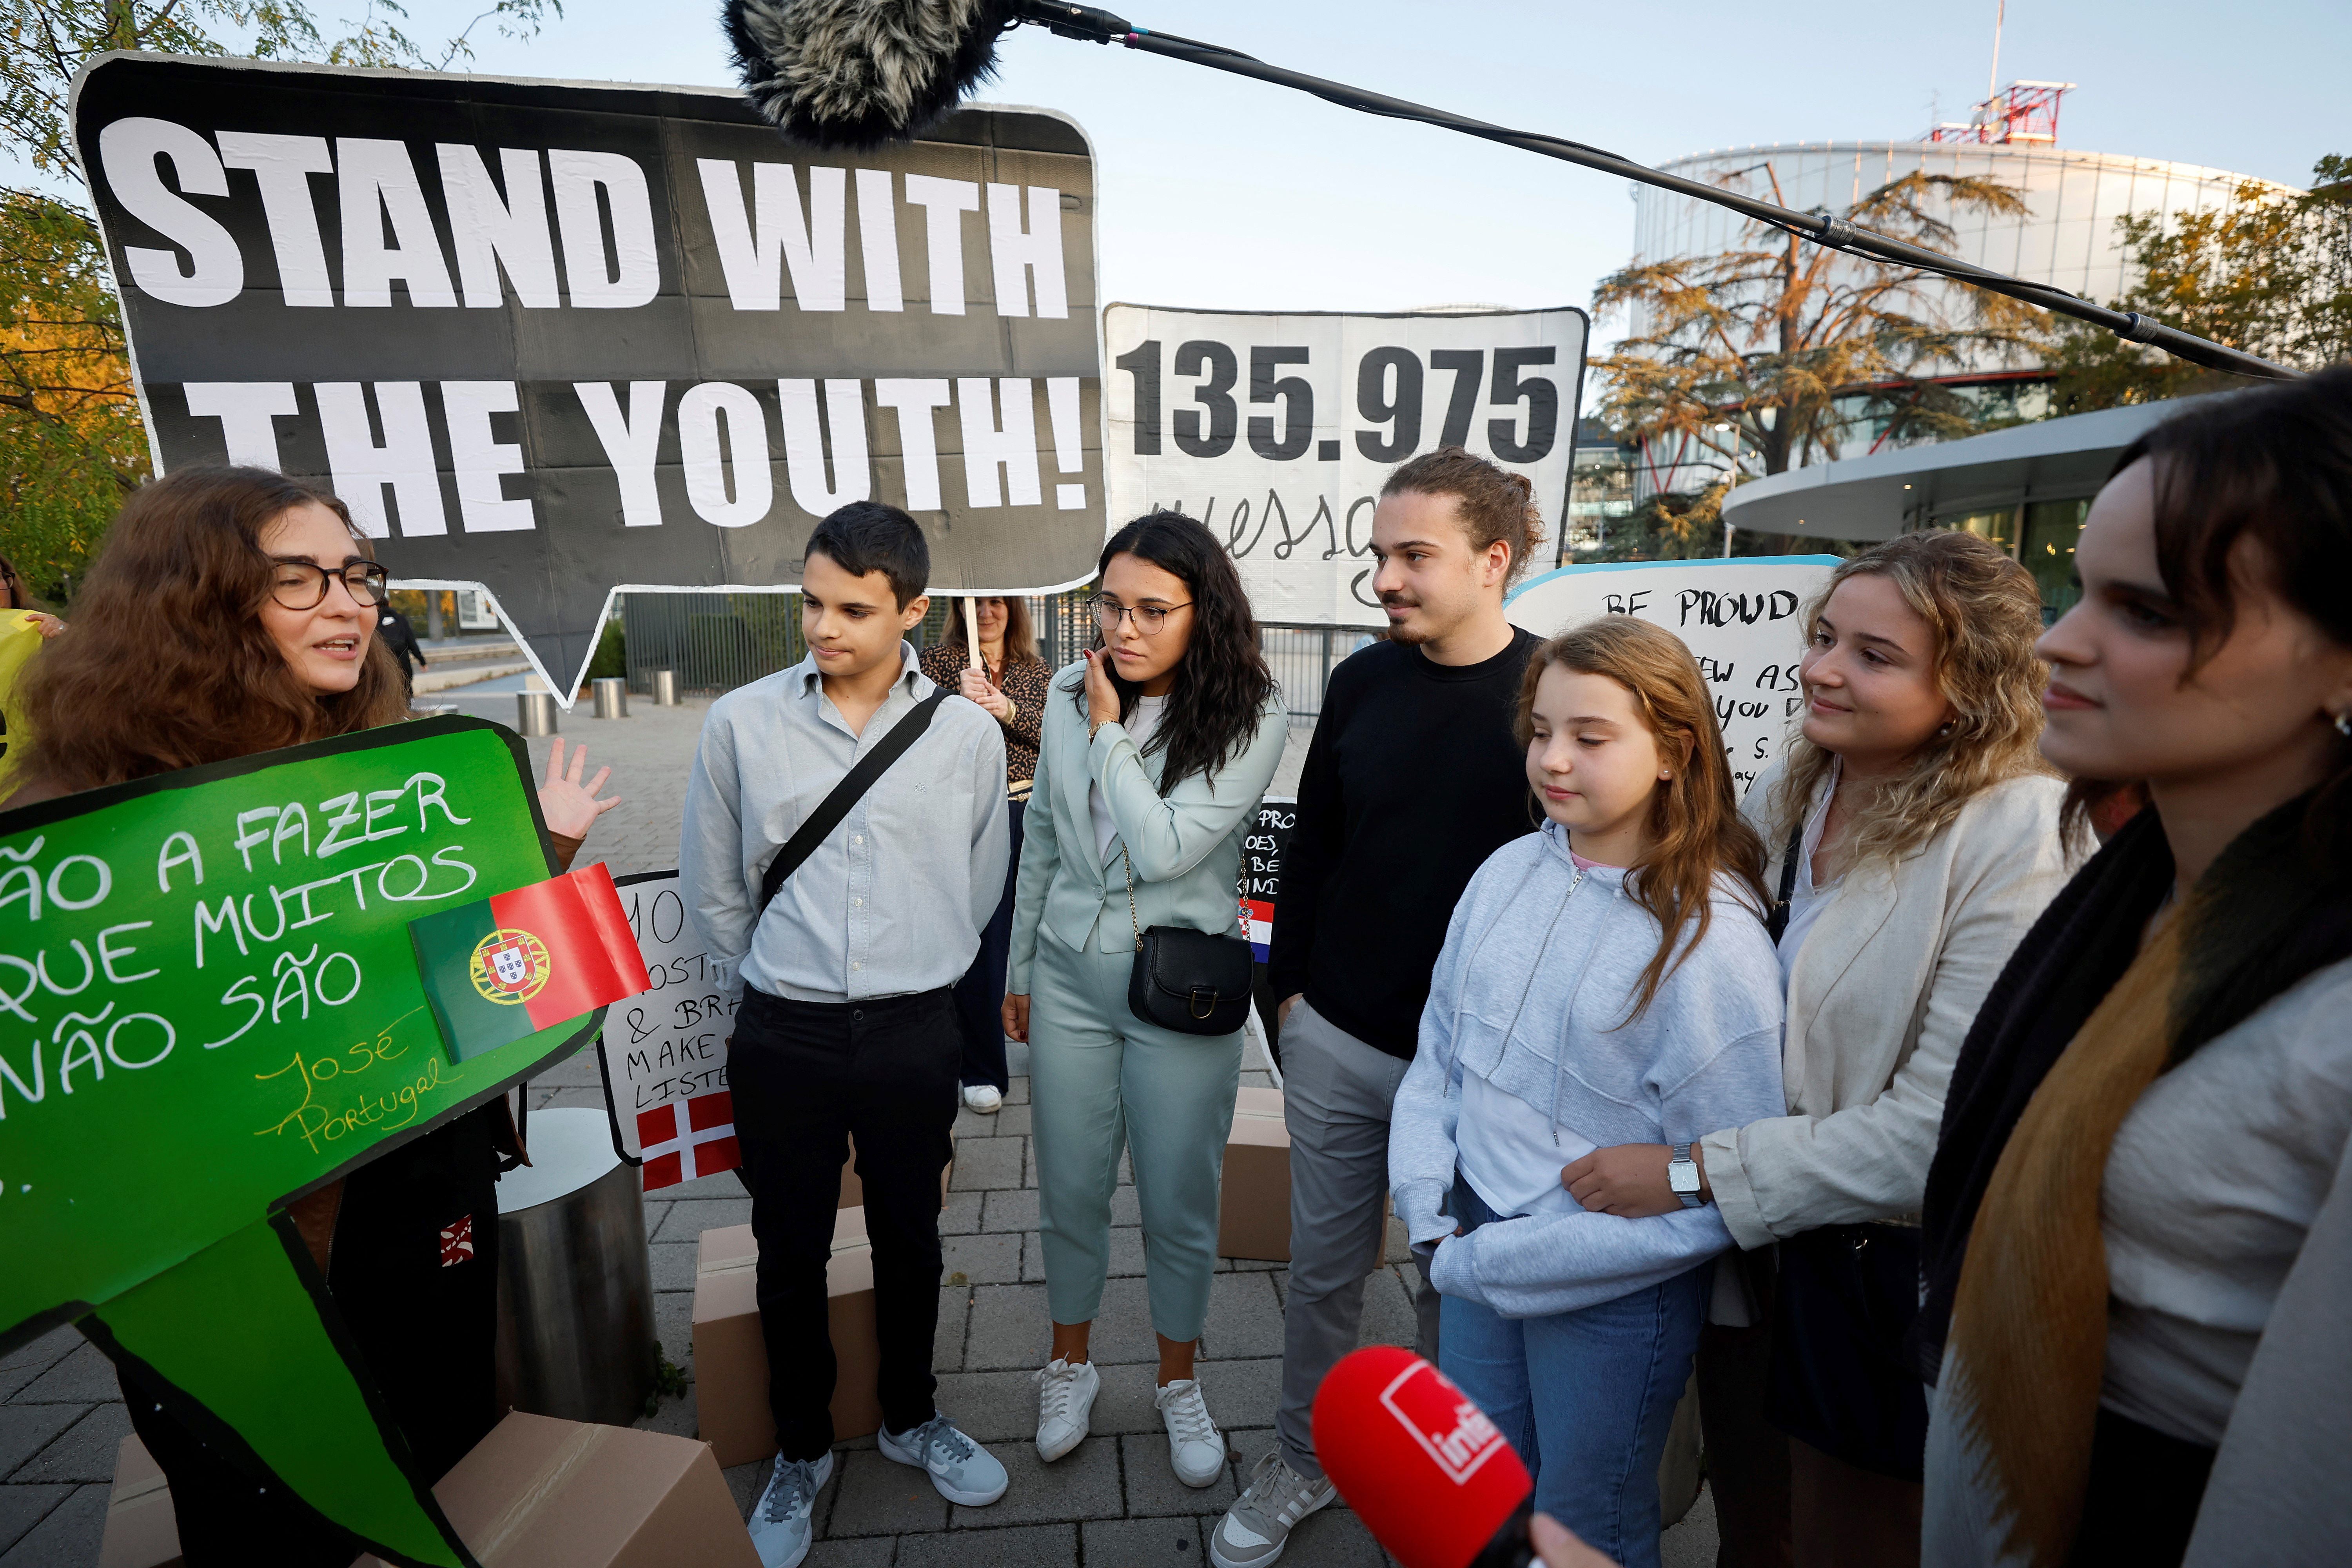 Young Portuguese citizens hold placards as they arrive at the European Court of Human Rights (ECHR) for a hearing in a climate change case involving themselves against 32 countries, in Strasbourg, eastern France